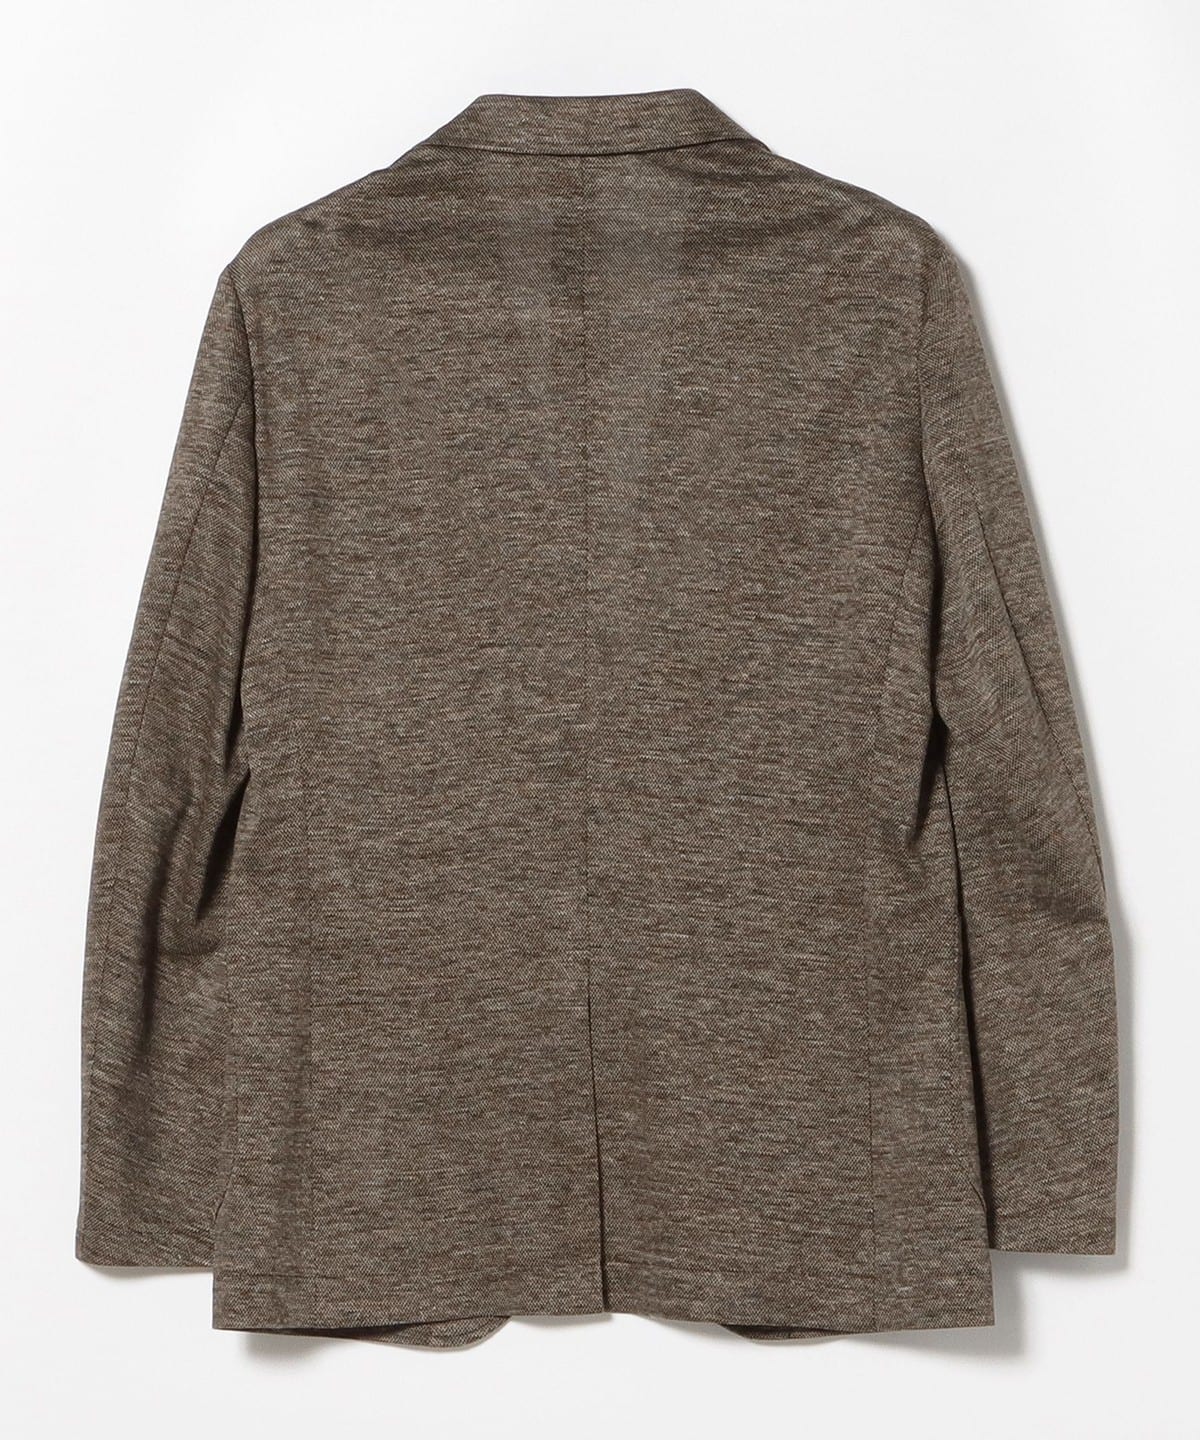 [Outlet] BEAMS HEART / Stretch Pique 2 Button Jacket